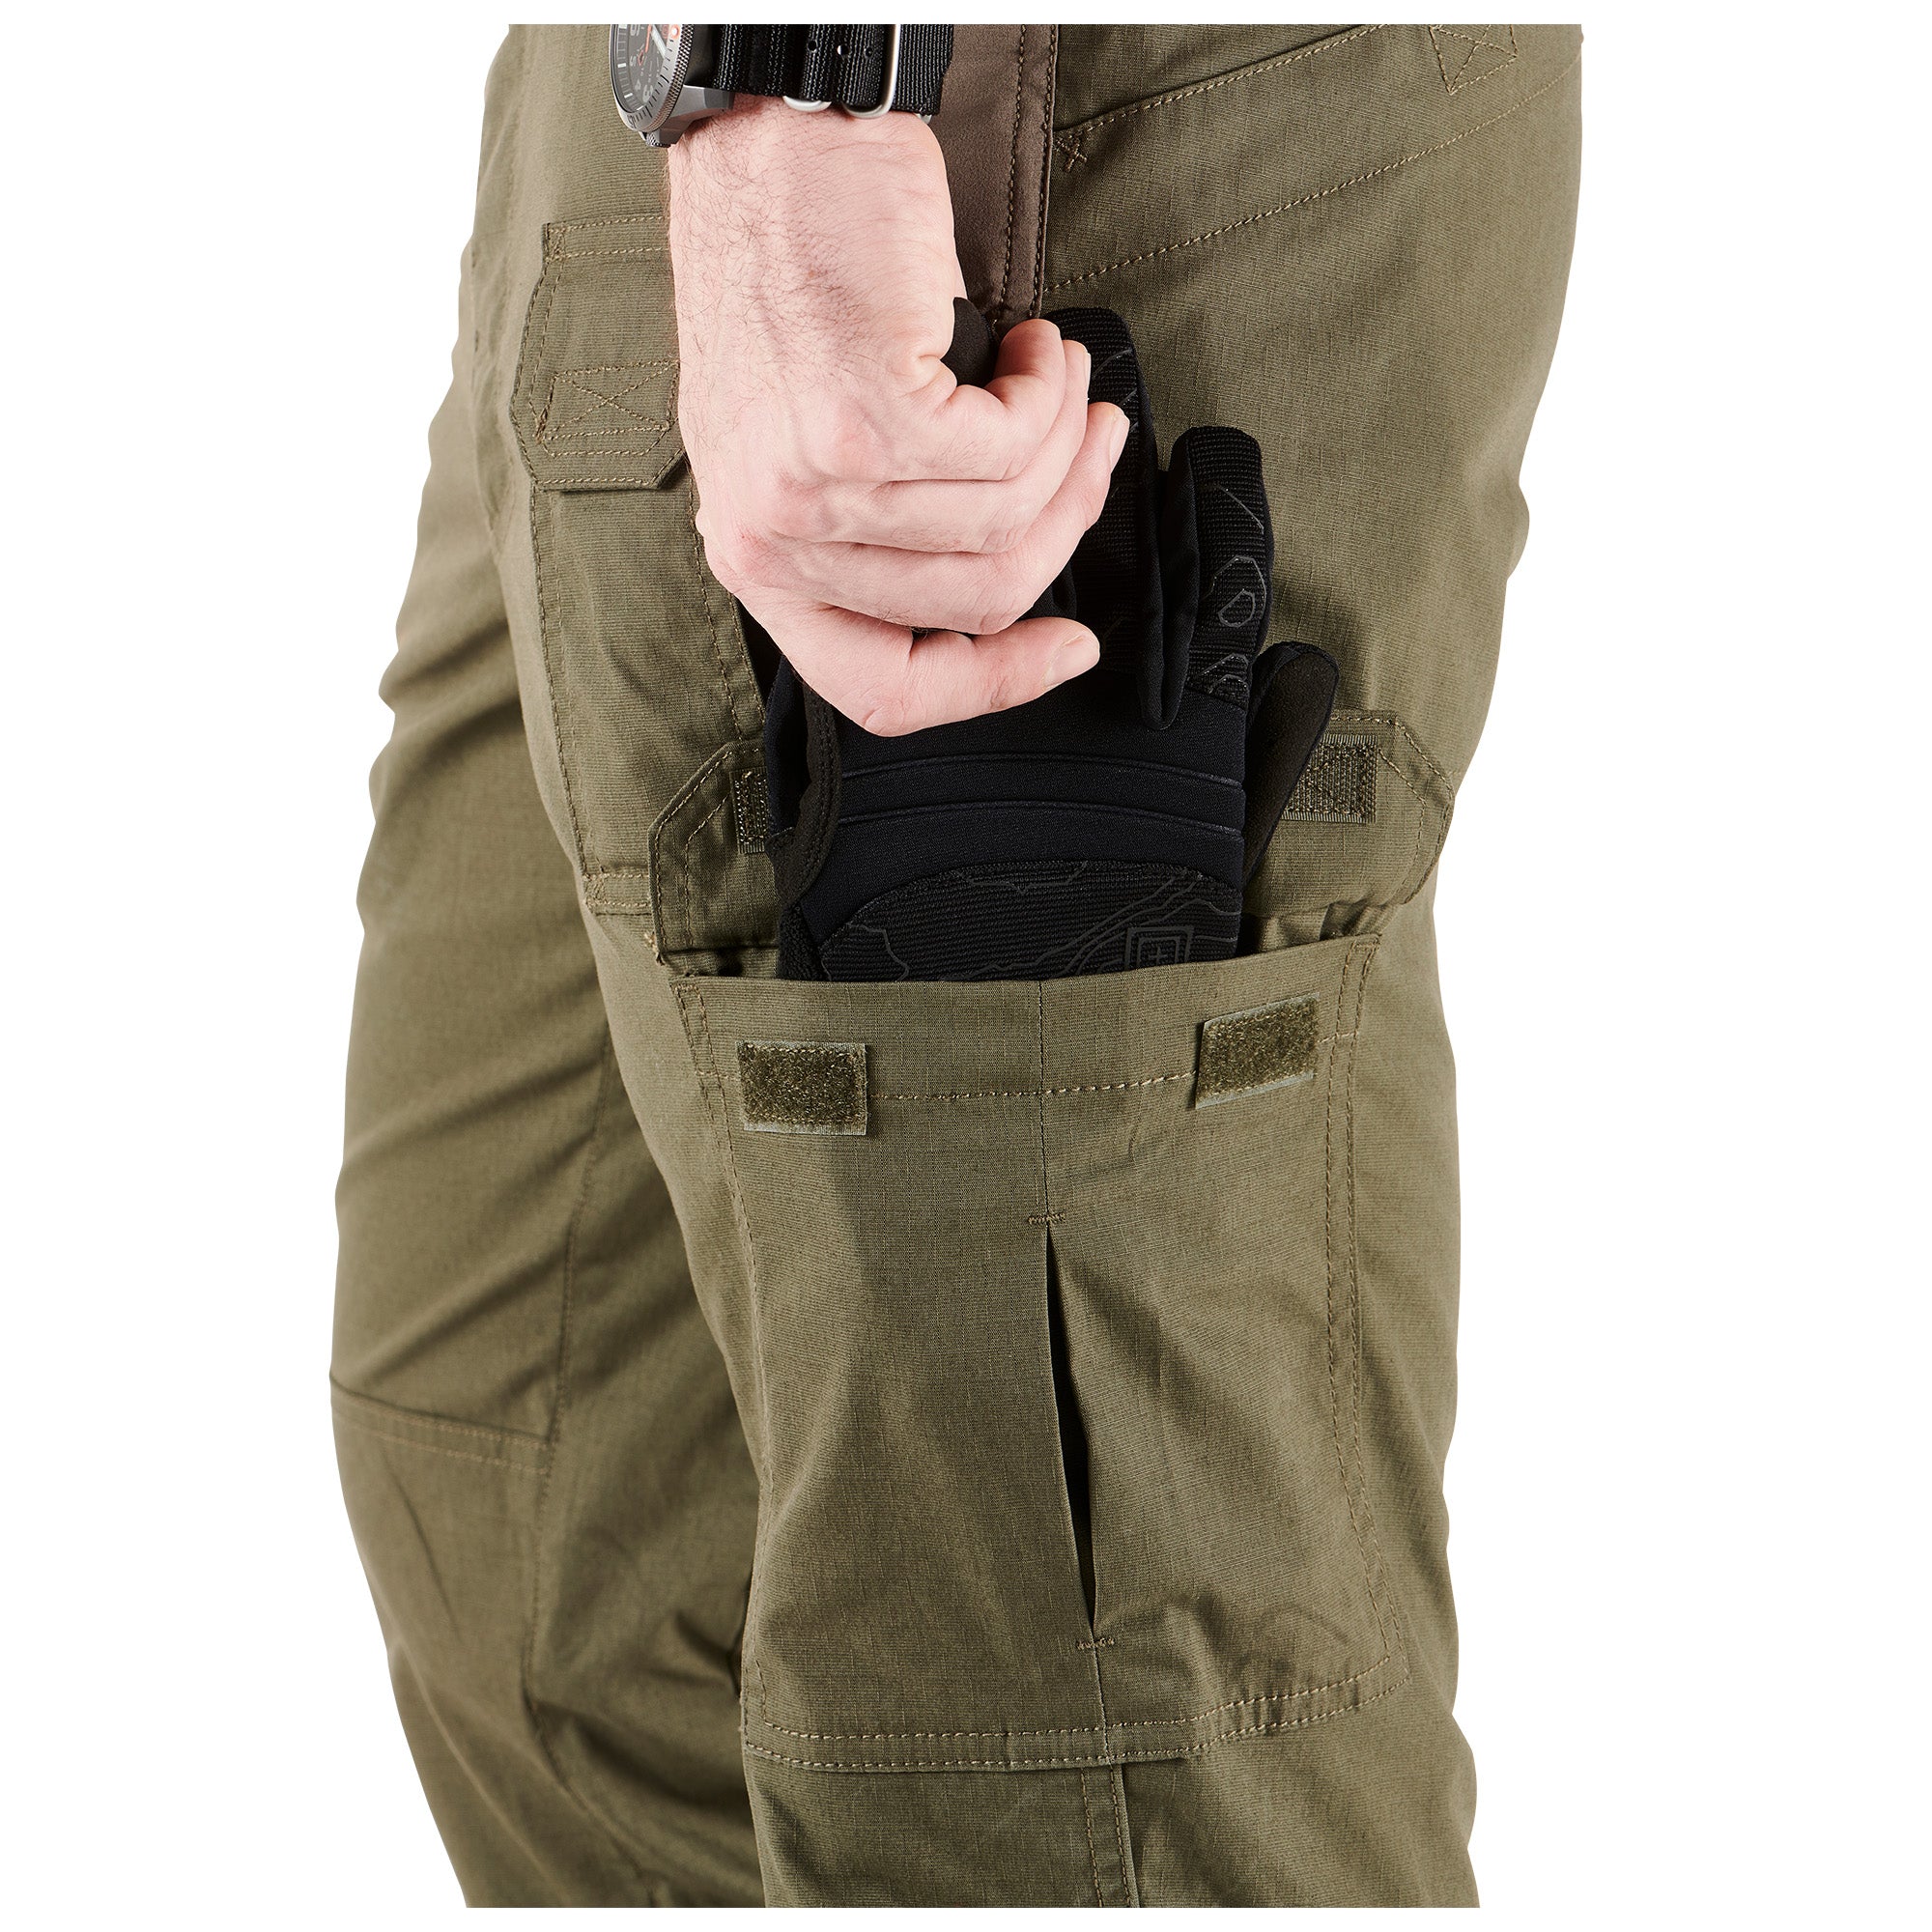 5.11 Tactical - Our brand new ABR Pro Pant is the next